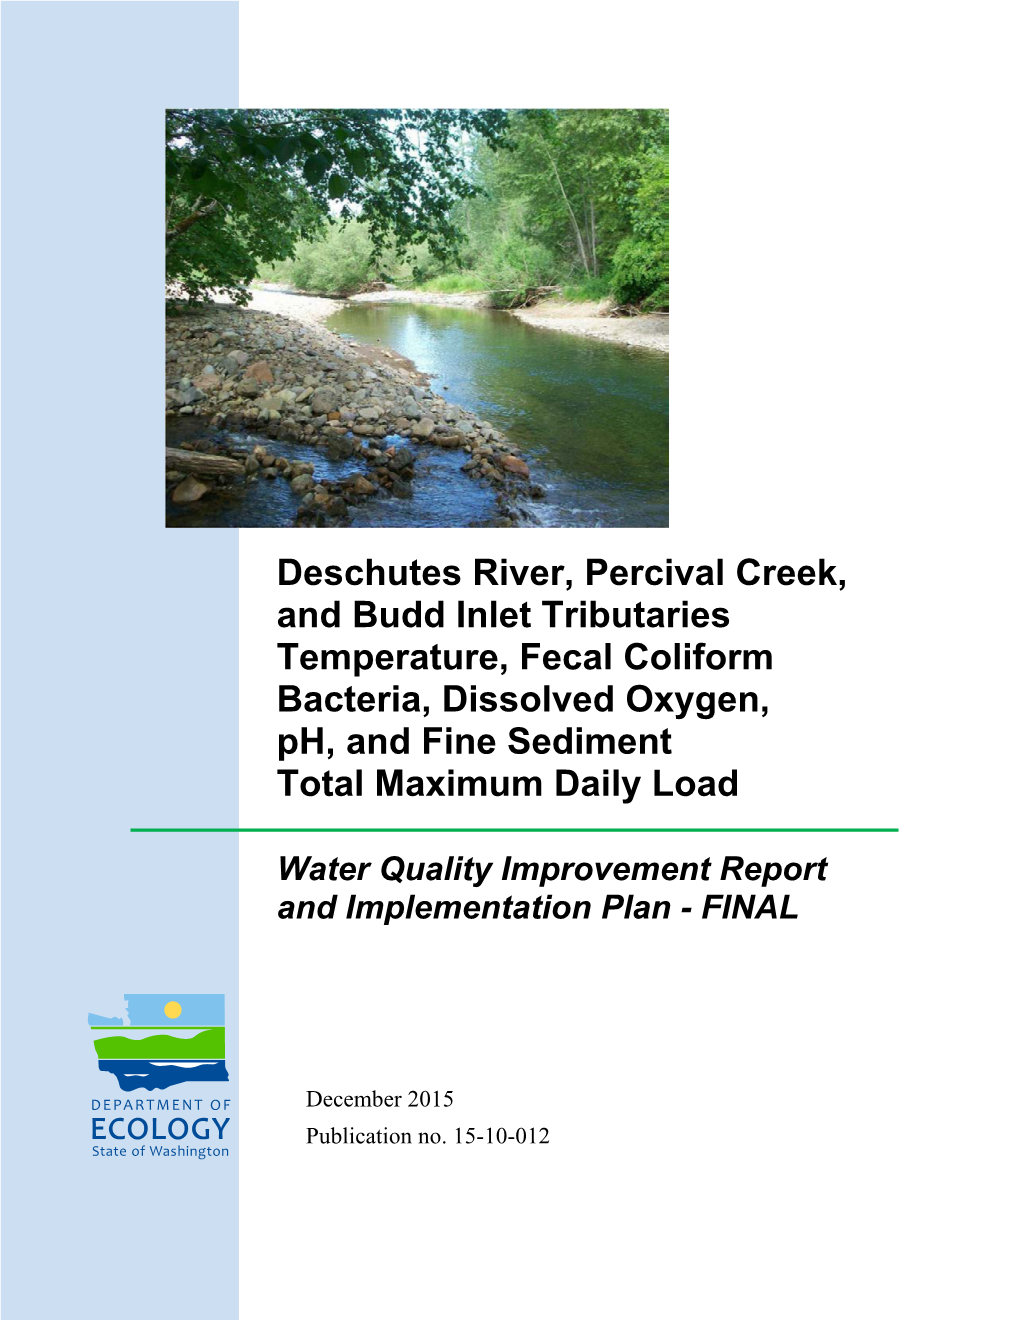 Deschutes River, Percival Creek, and Budd Inlet Tributaries Temperature, Fecal Coliform Bacteria, Dissolved Oxygen, Ph, and Fine Sediment Total Maximum Daily Load